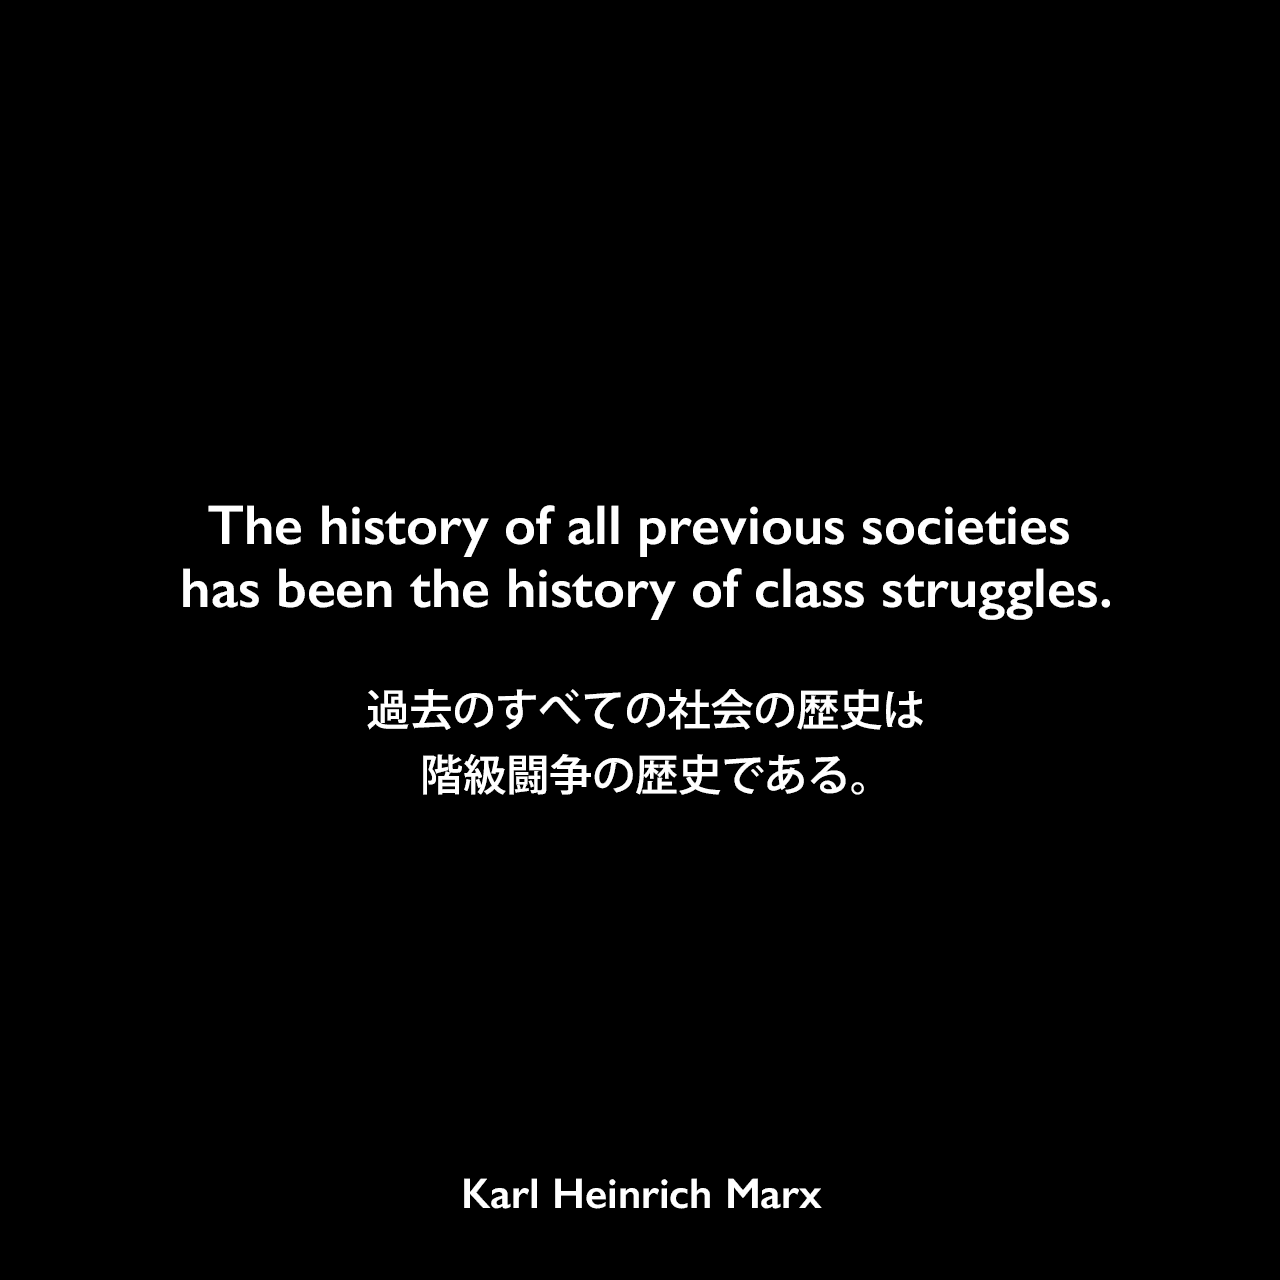 The history of all previous societies has been the history of class struggles.過去のすべての社会の歴史は、階級闘争の歴史である。- カール・マルクス とフリードリヒ・エンゲルスの共著「共産党宣言」よりKarl Heinrich Marx